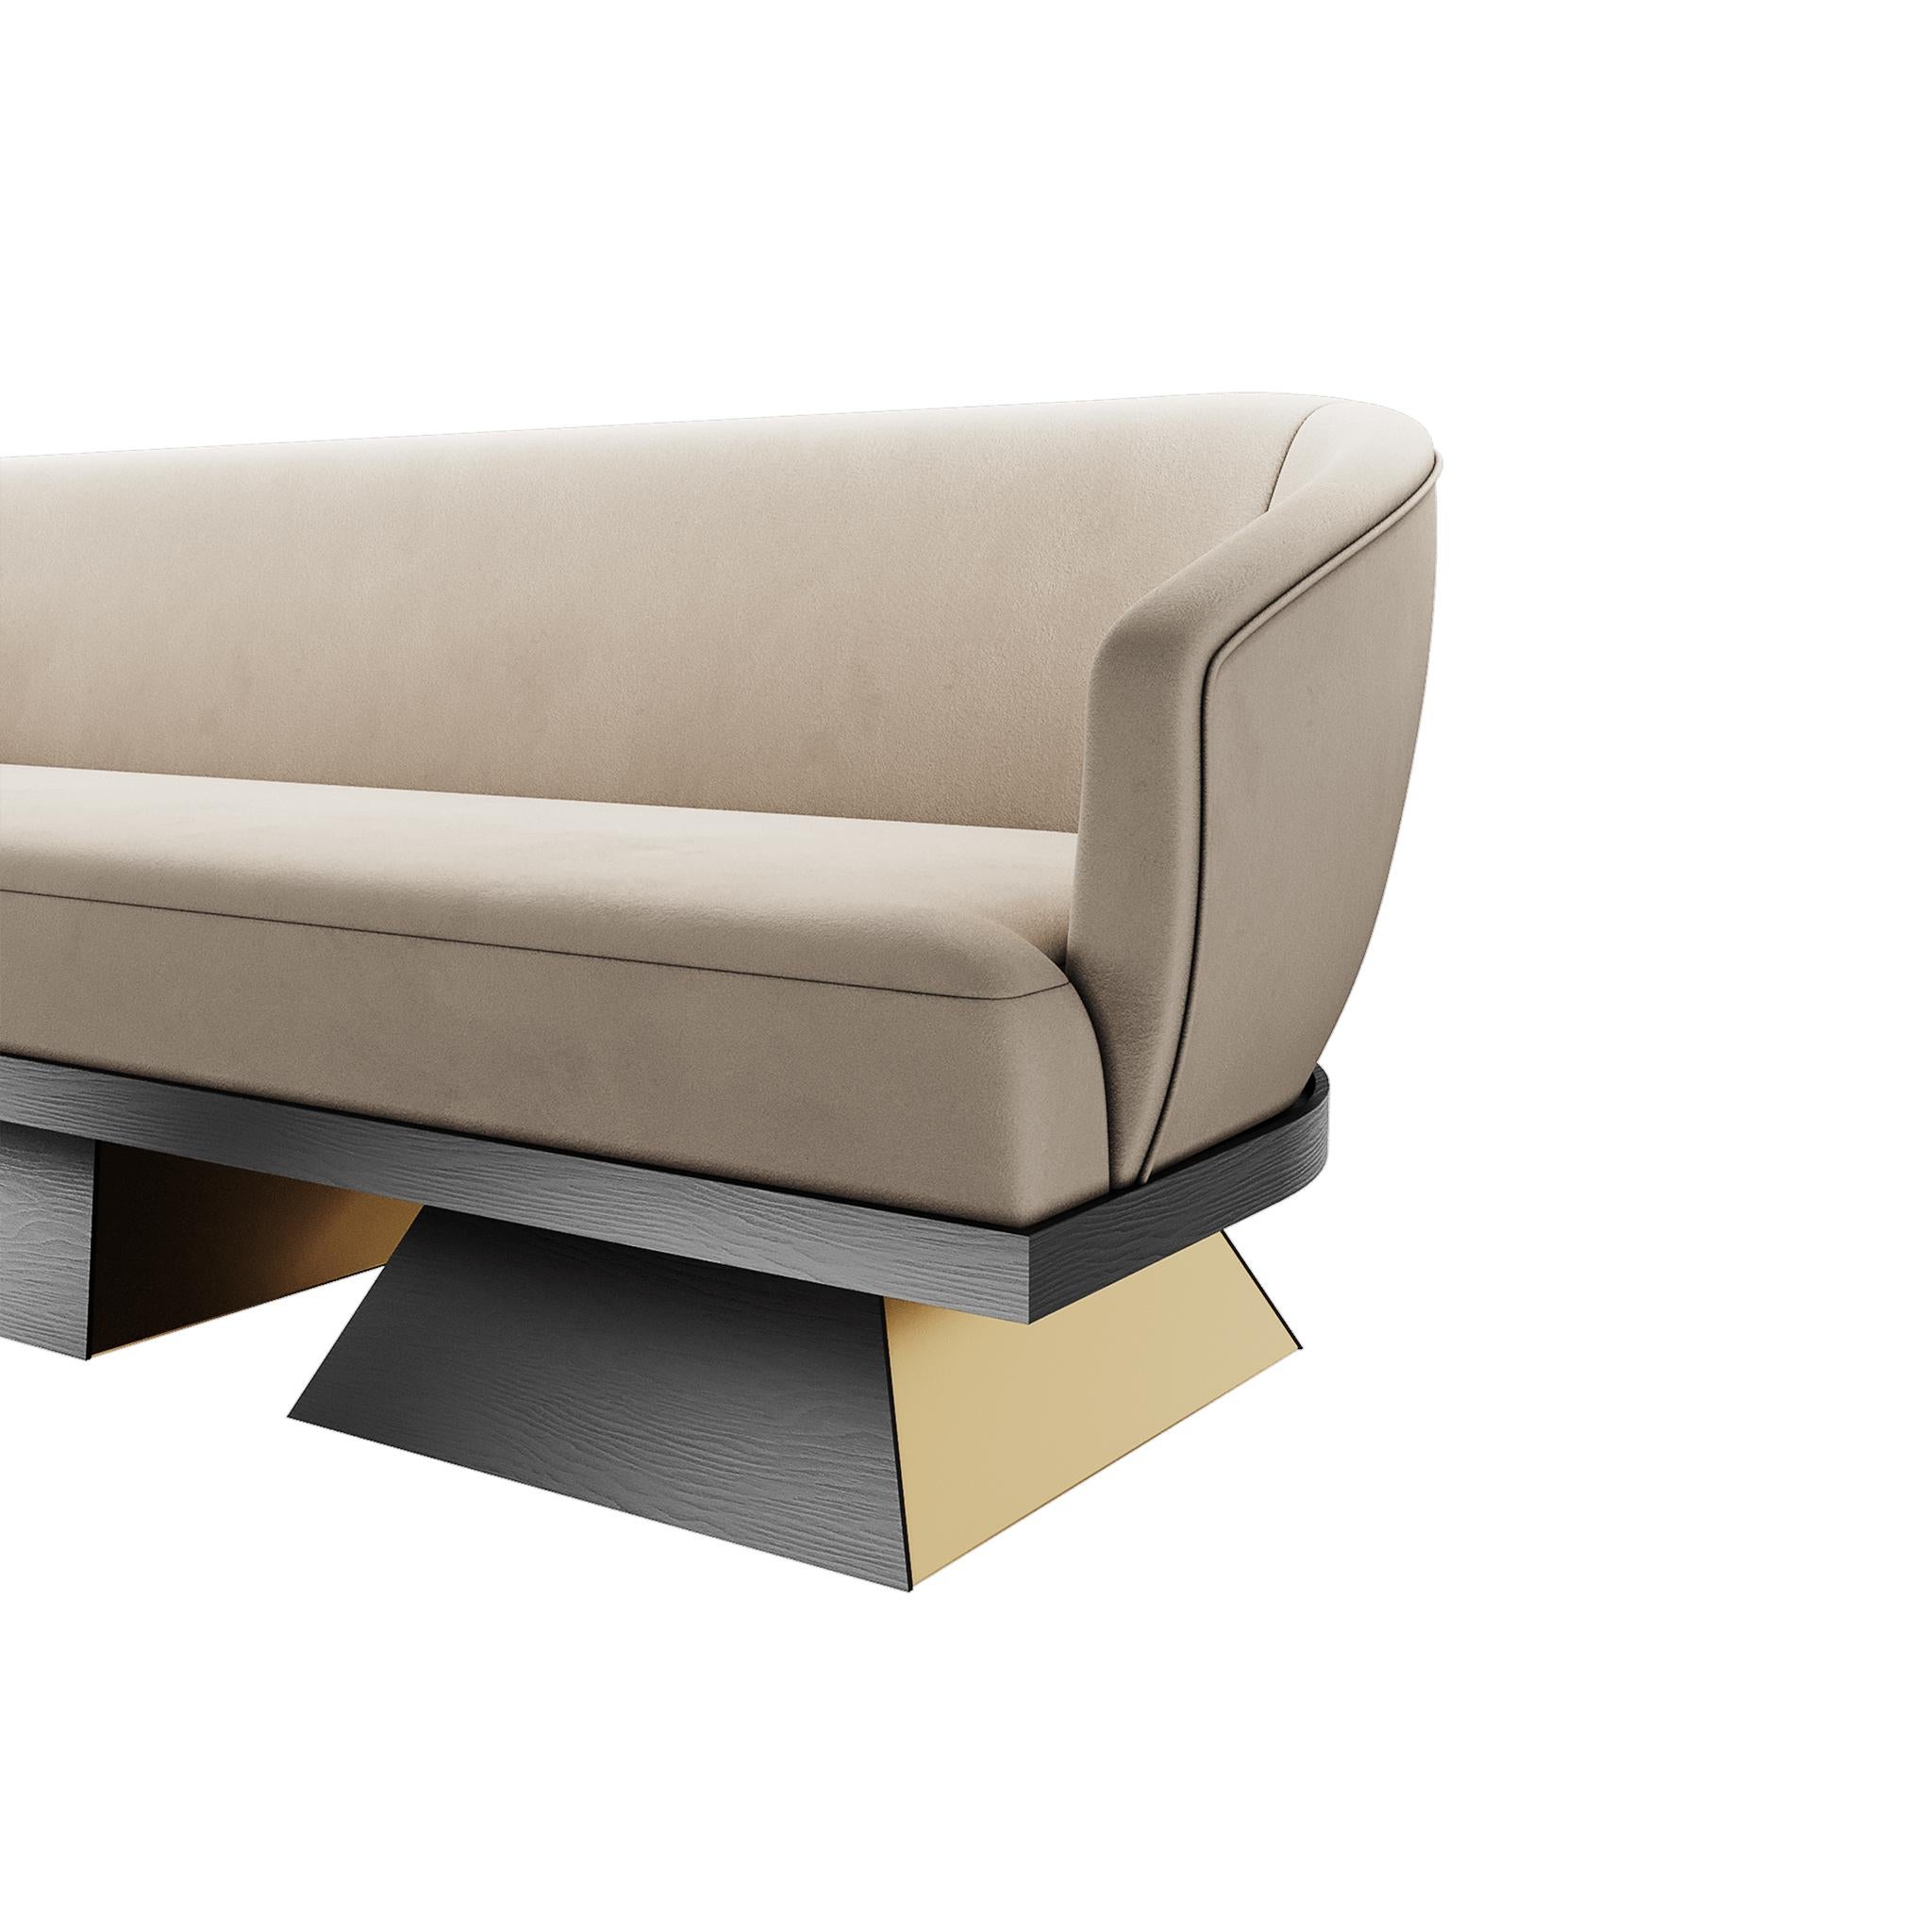 Portuguese Modern Luxury in Suede with Base in Matte Wengue Ash Wood, Details in Brass For Sale